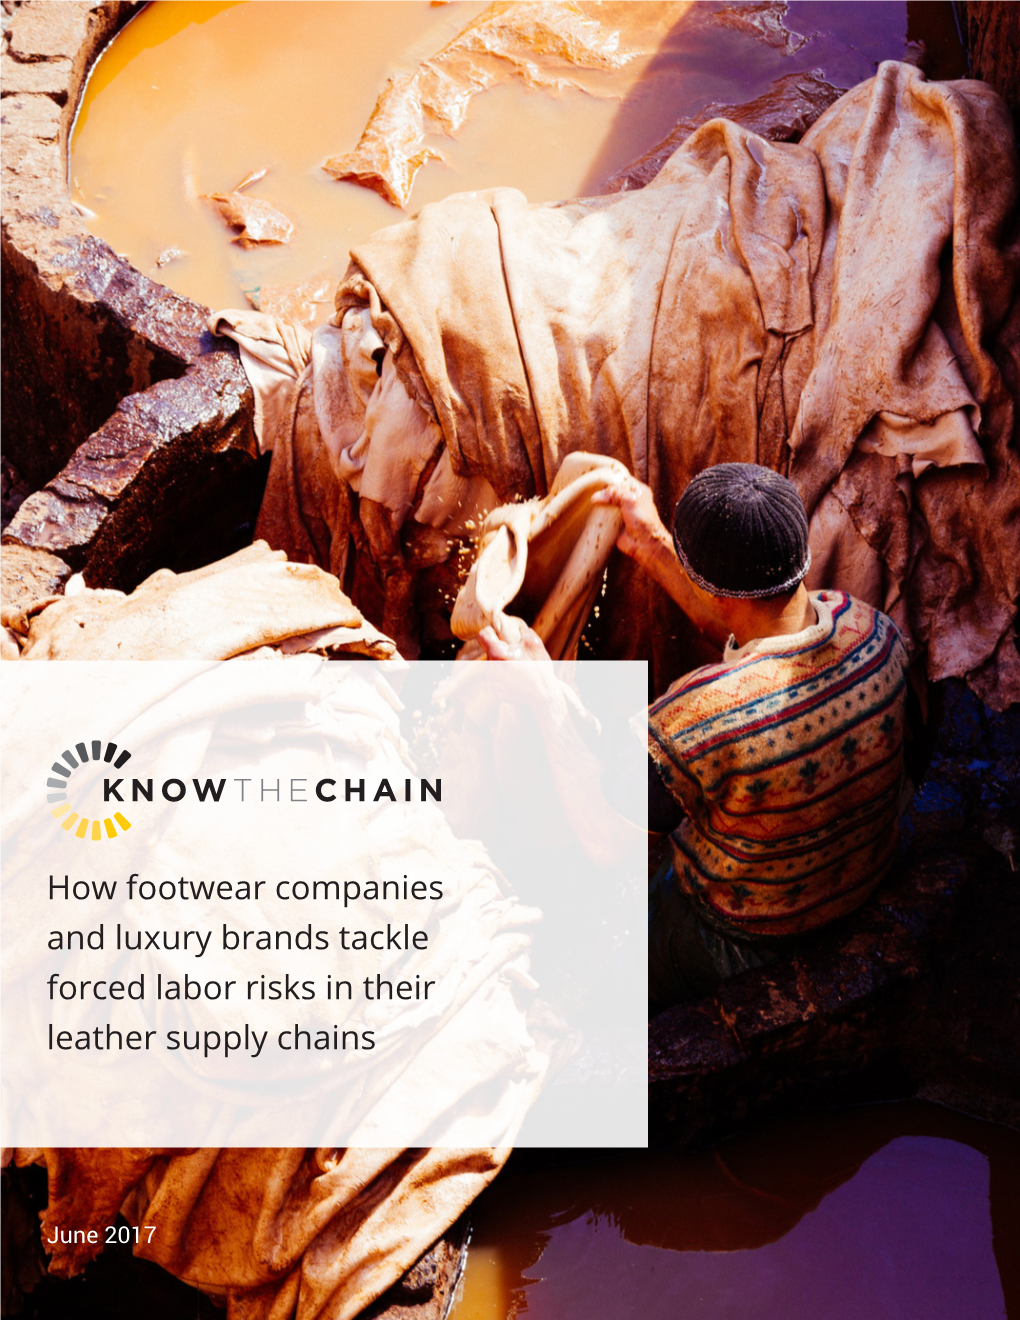 How Footwear Companies and Luxury Brands Tackle Forced Labor Risks in Their Leather Supply Chains